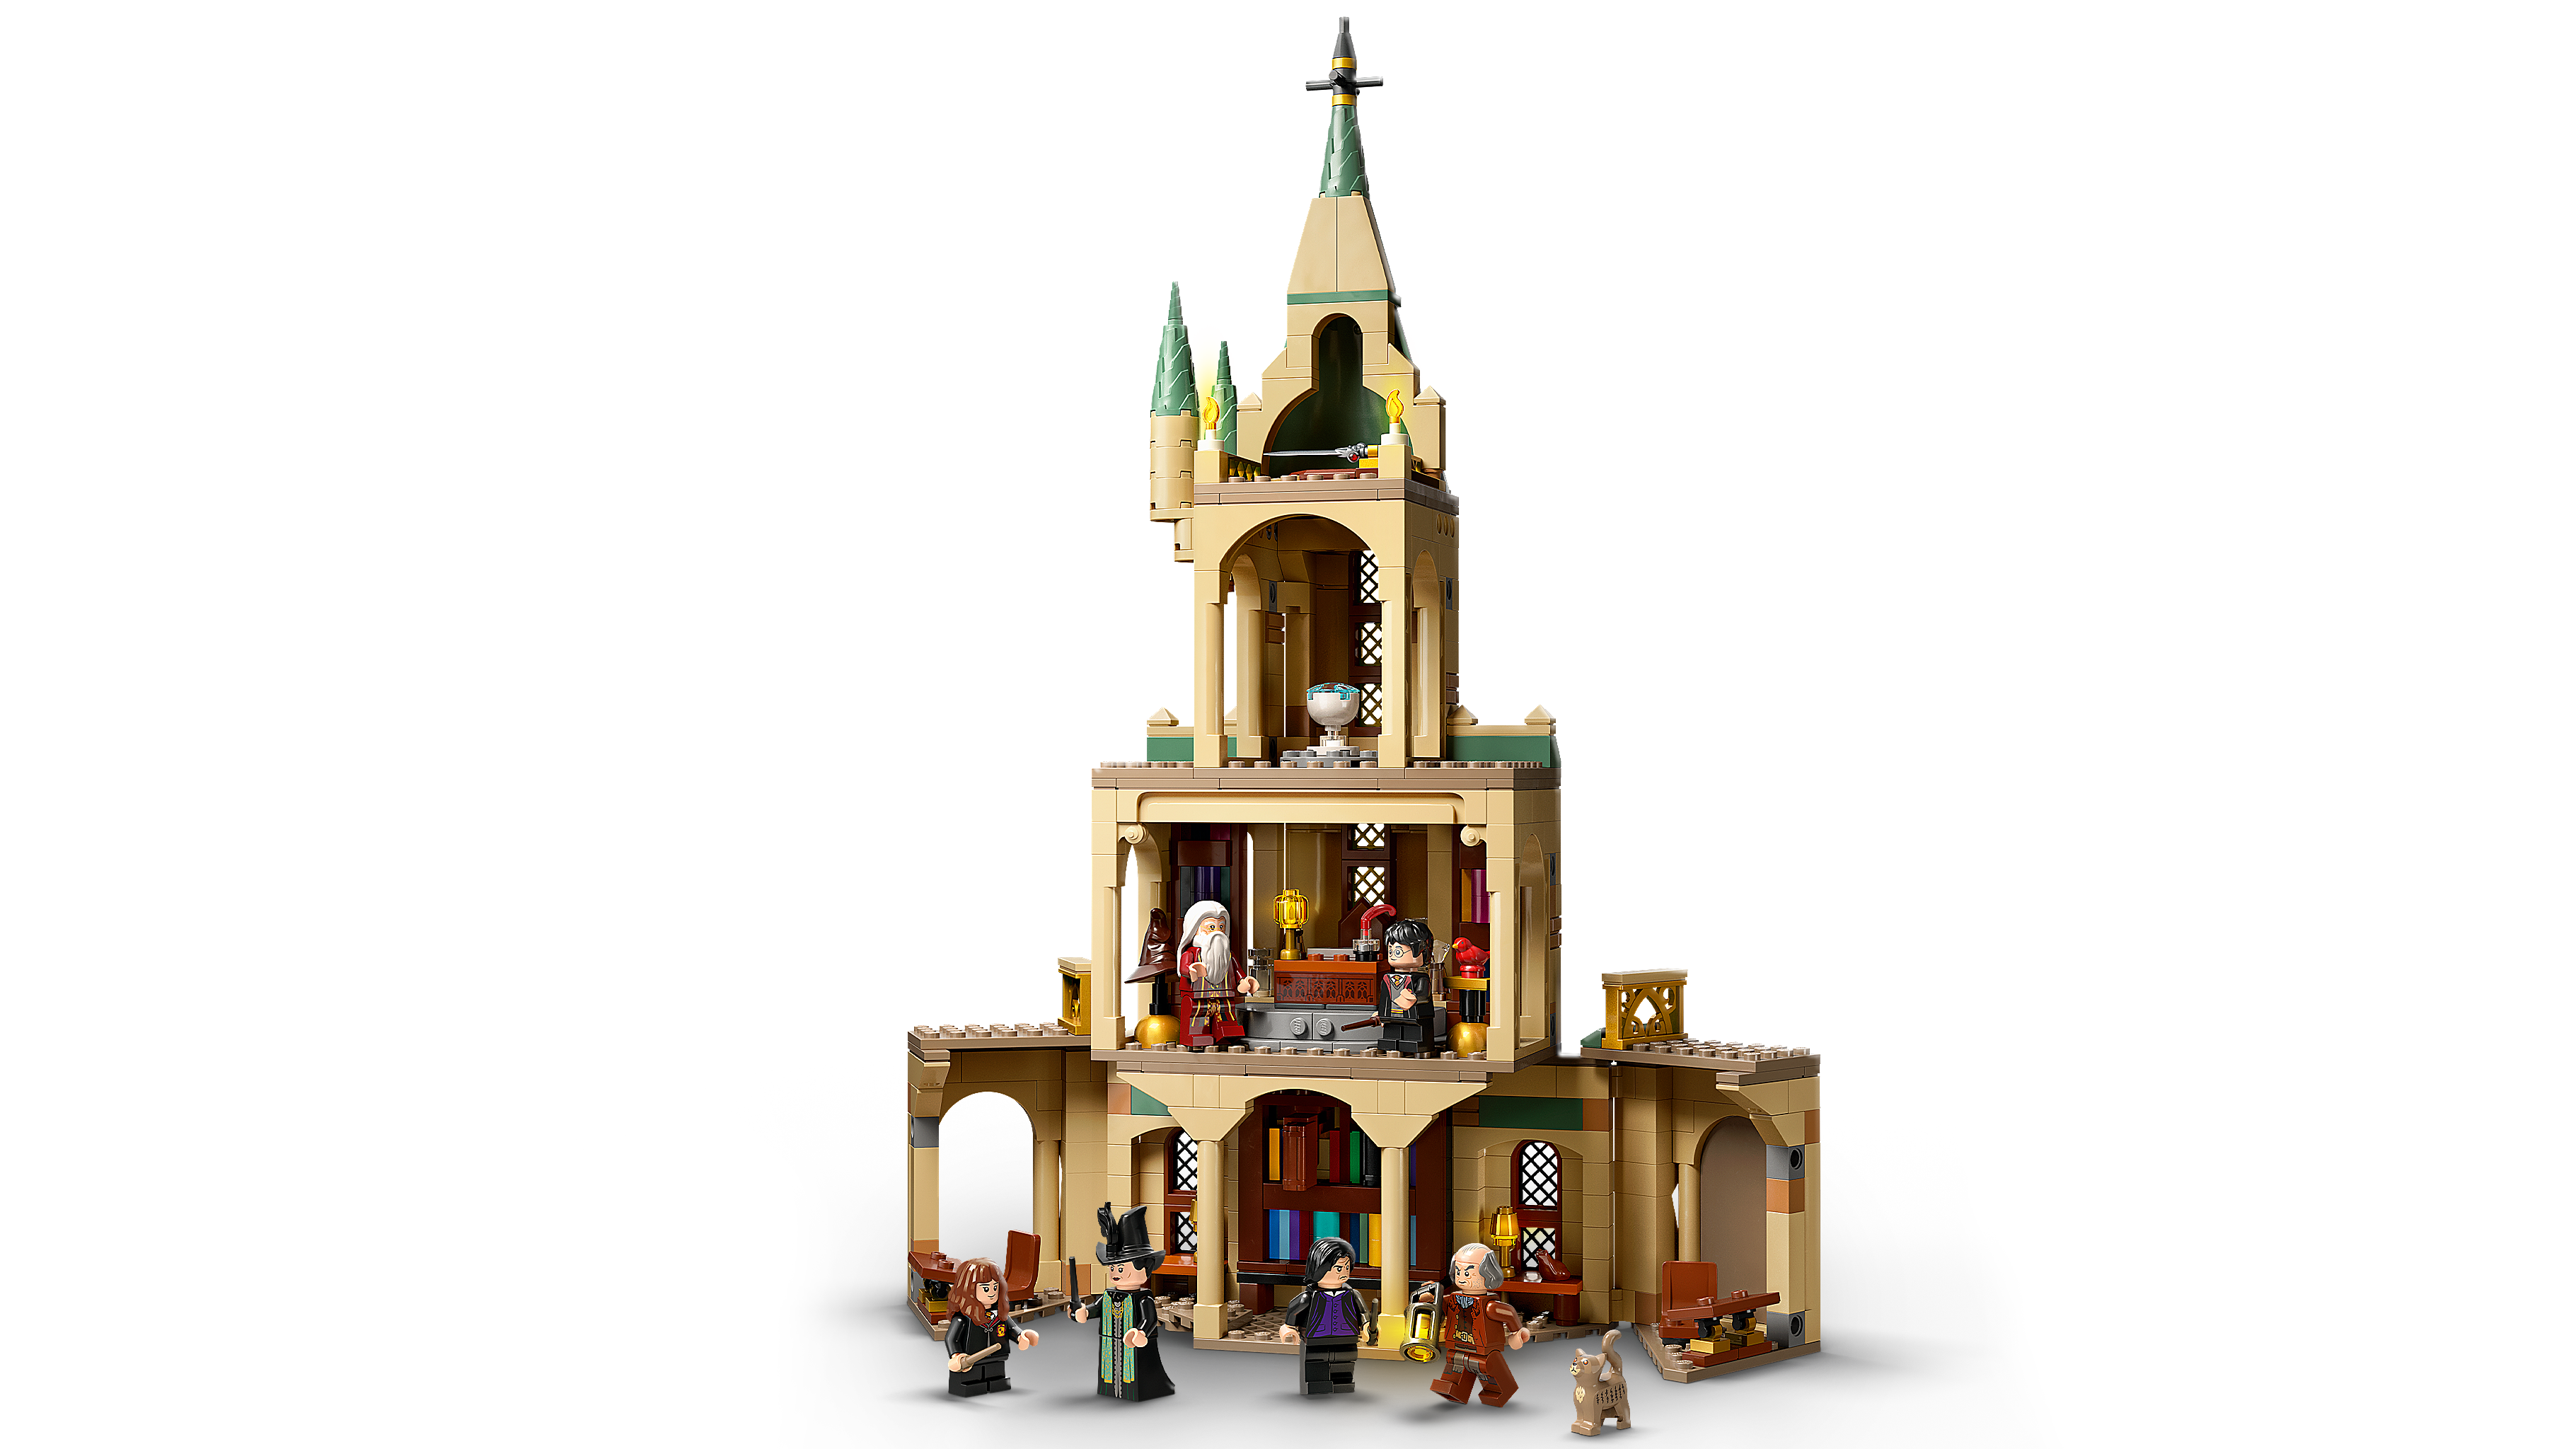 LEGO Harry Potter Hogwarts Dumbledore's Office 76402 by LEGO Systems Inc.